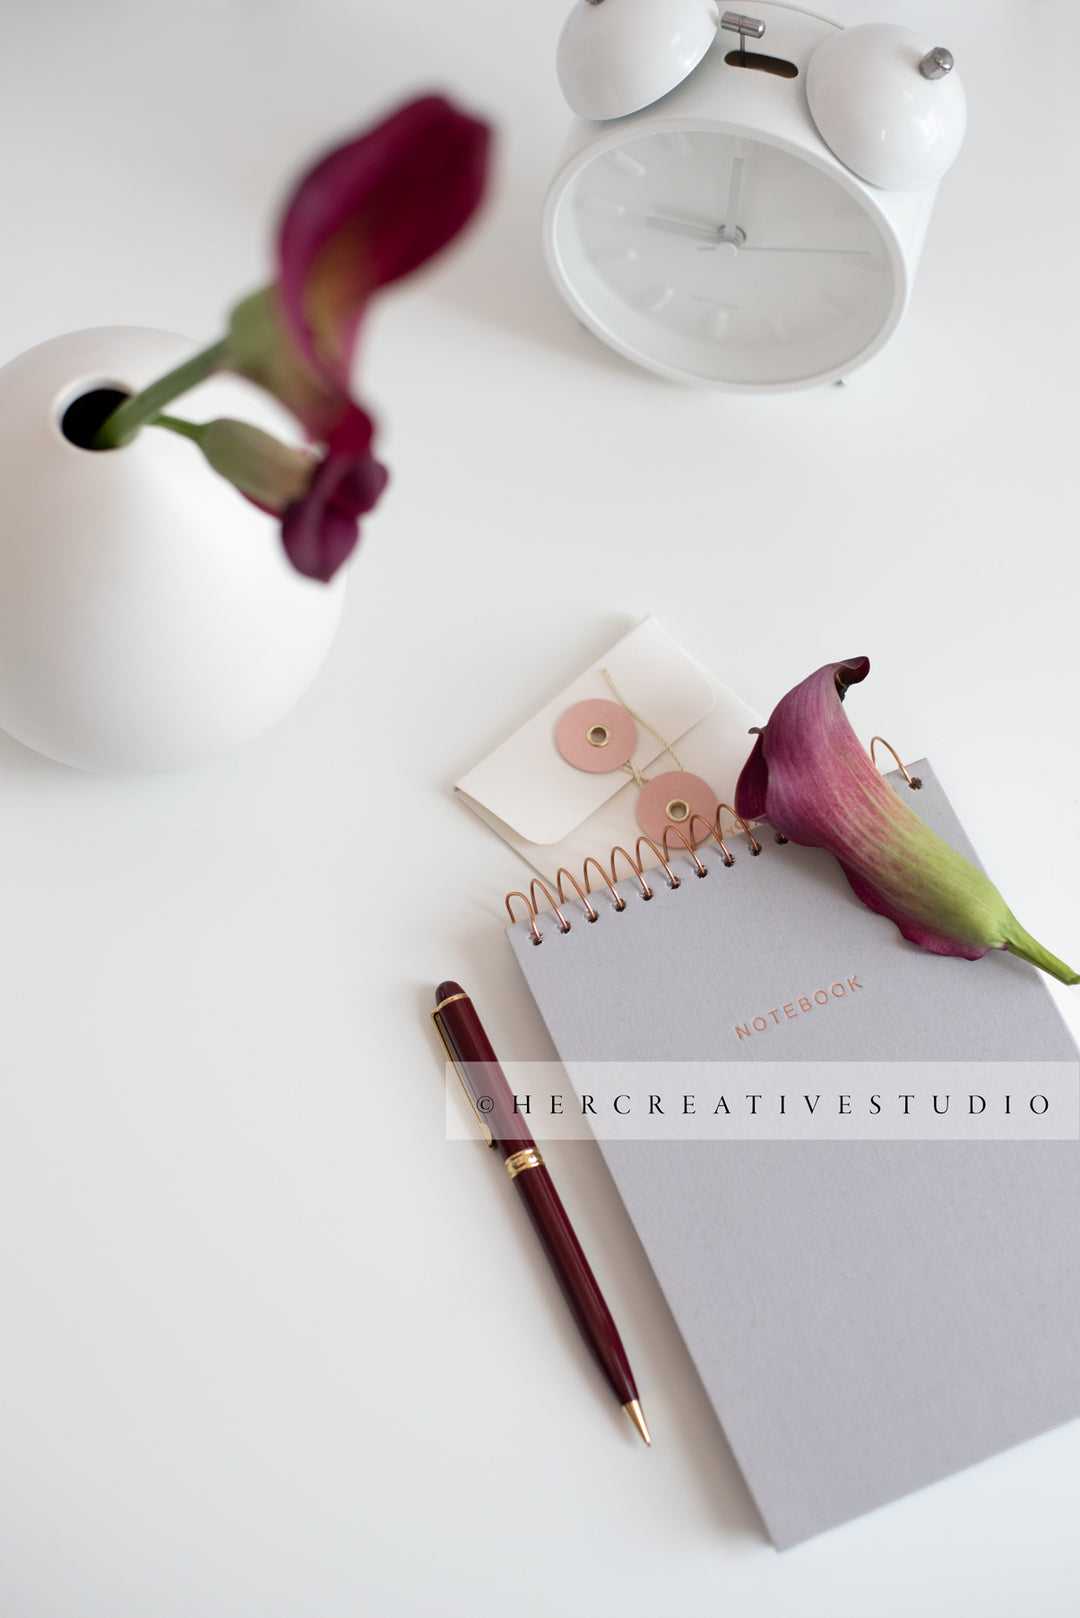 Calla Lilly, Notebook & Clock on White Background